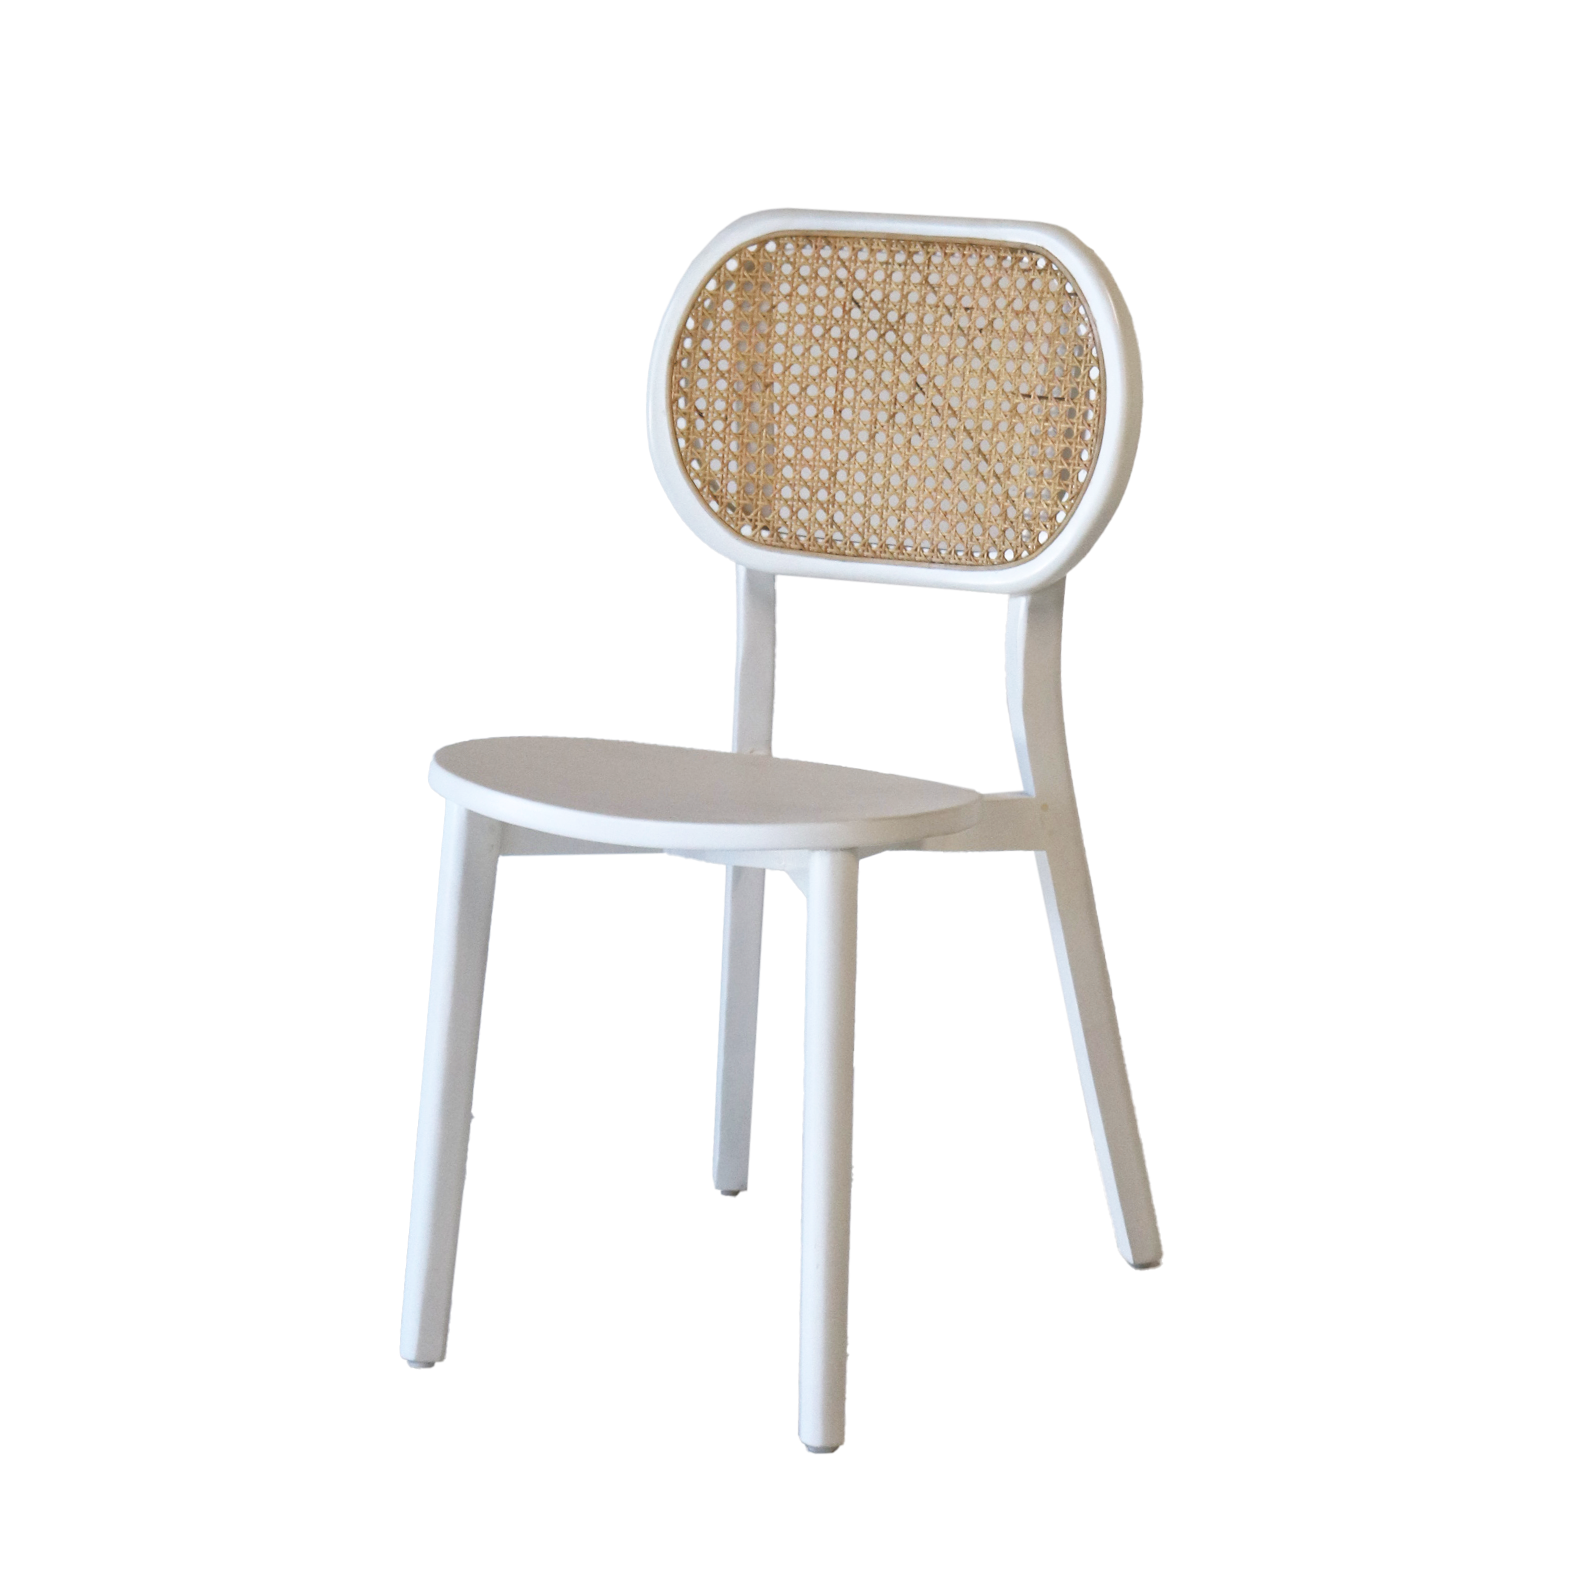 White and Rattan Chair Hire